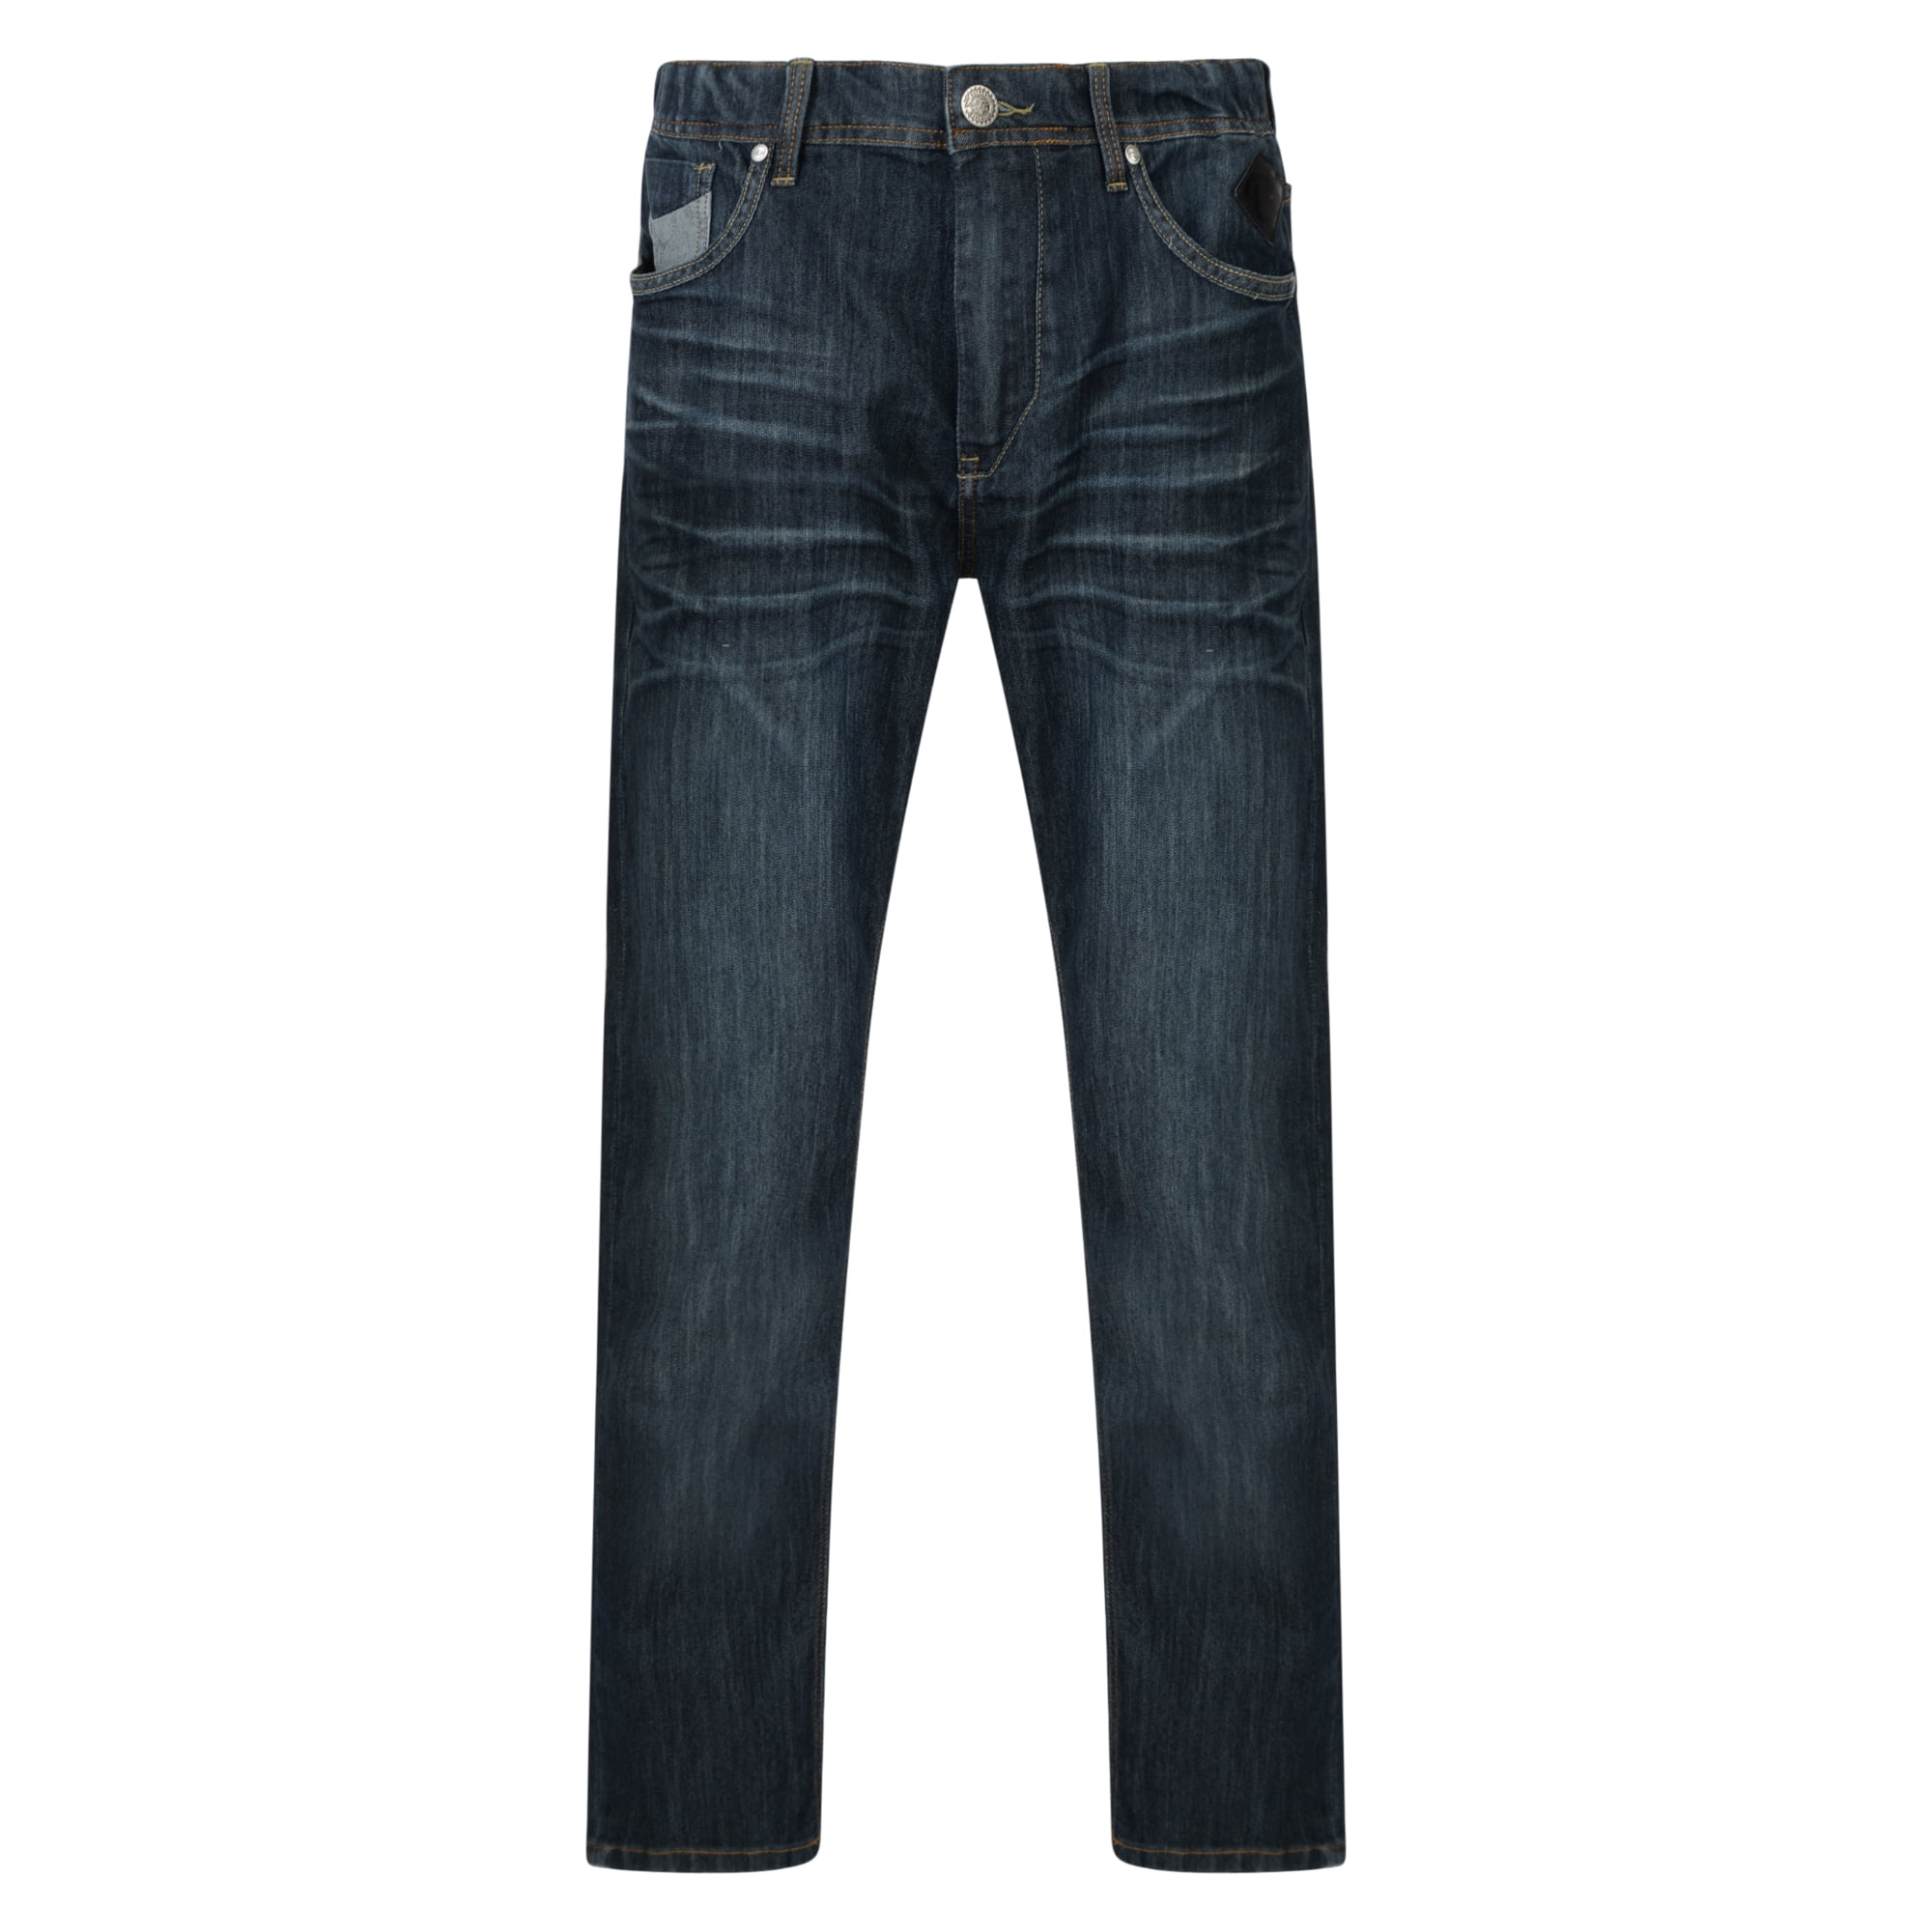 Horn Omgivelser lanthan Kam Jeanswear Mens Rory Low Waist Stretch Jeans | Walmart Canada